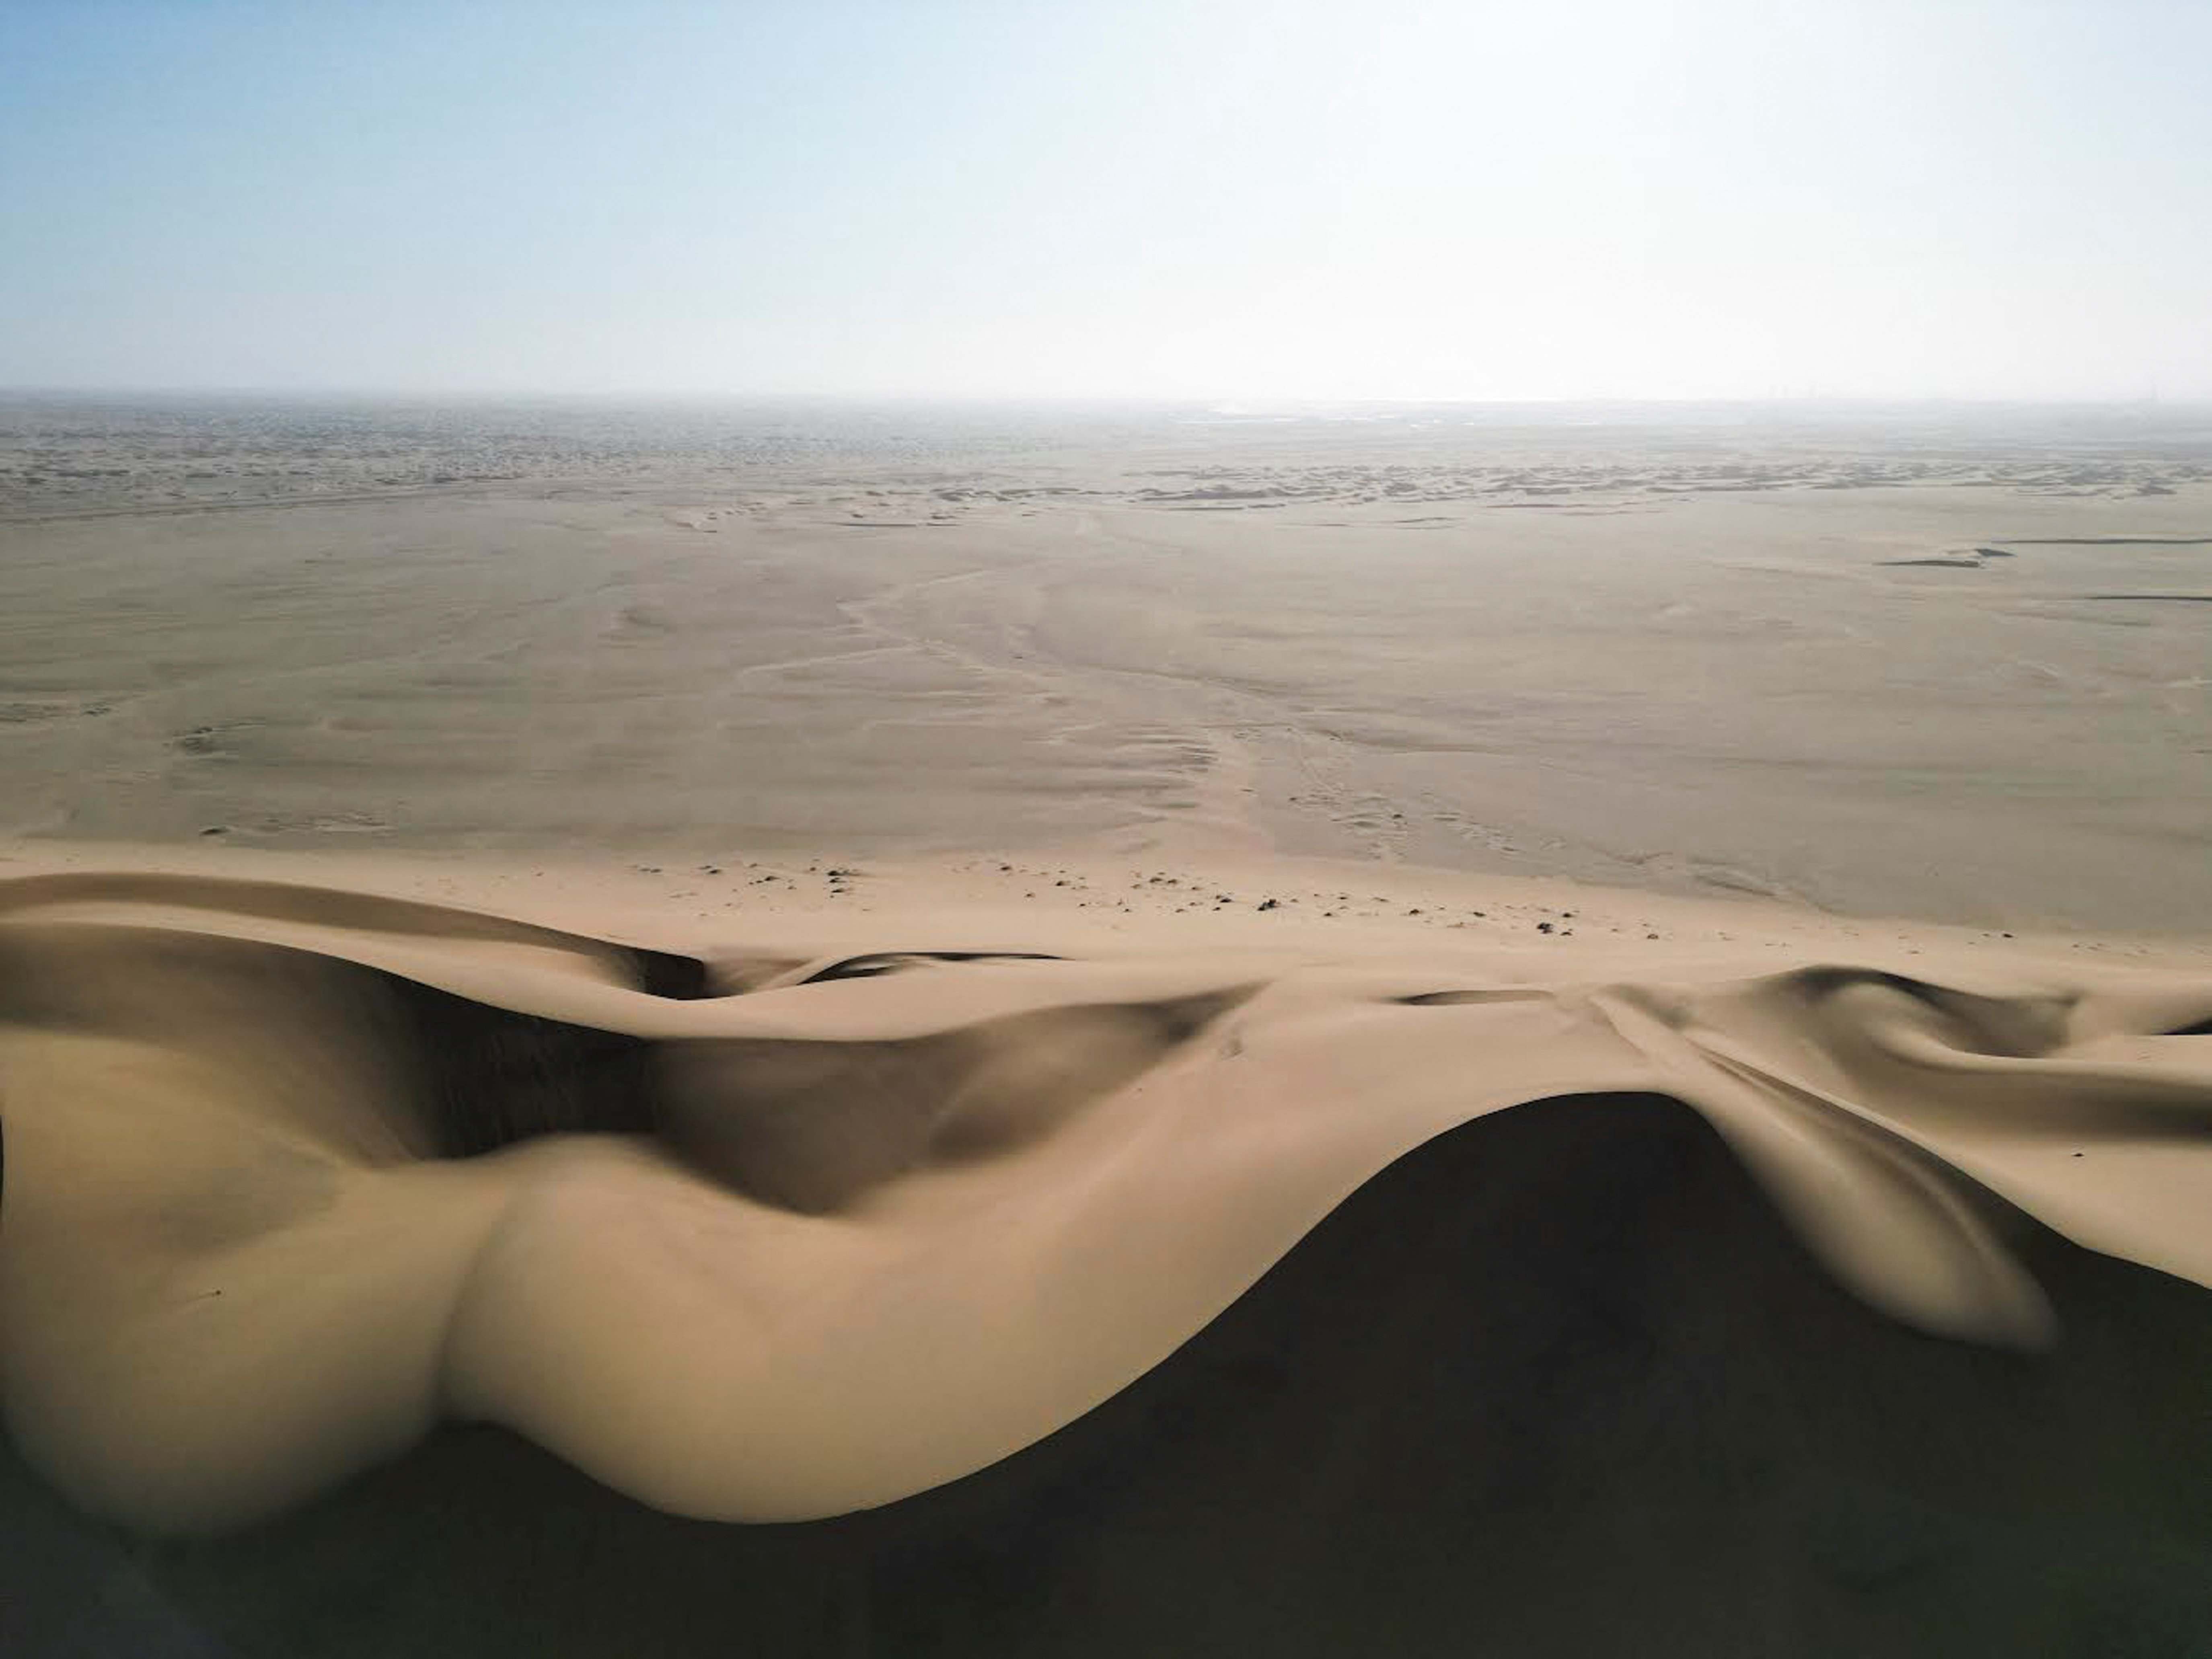 A drone view of Dune 7 and a desert in the background in Walvis Bay